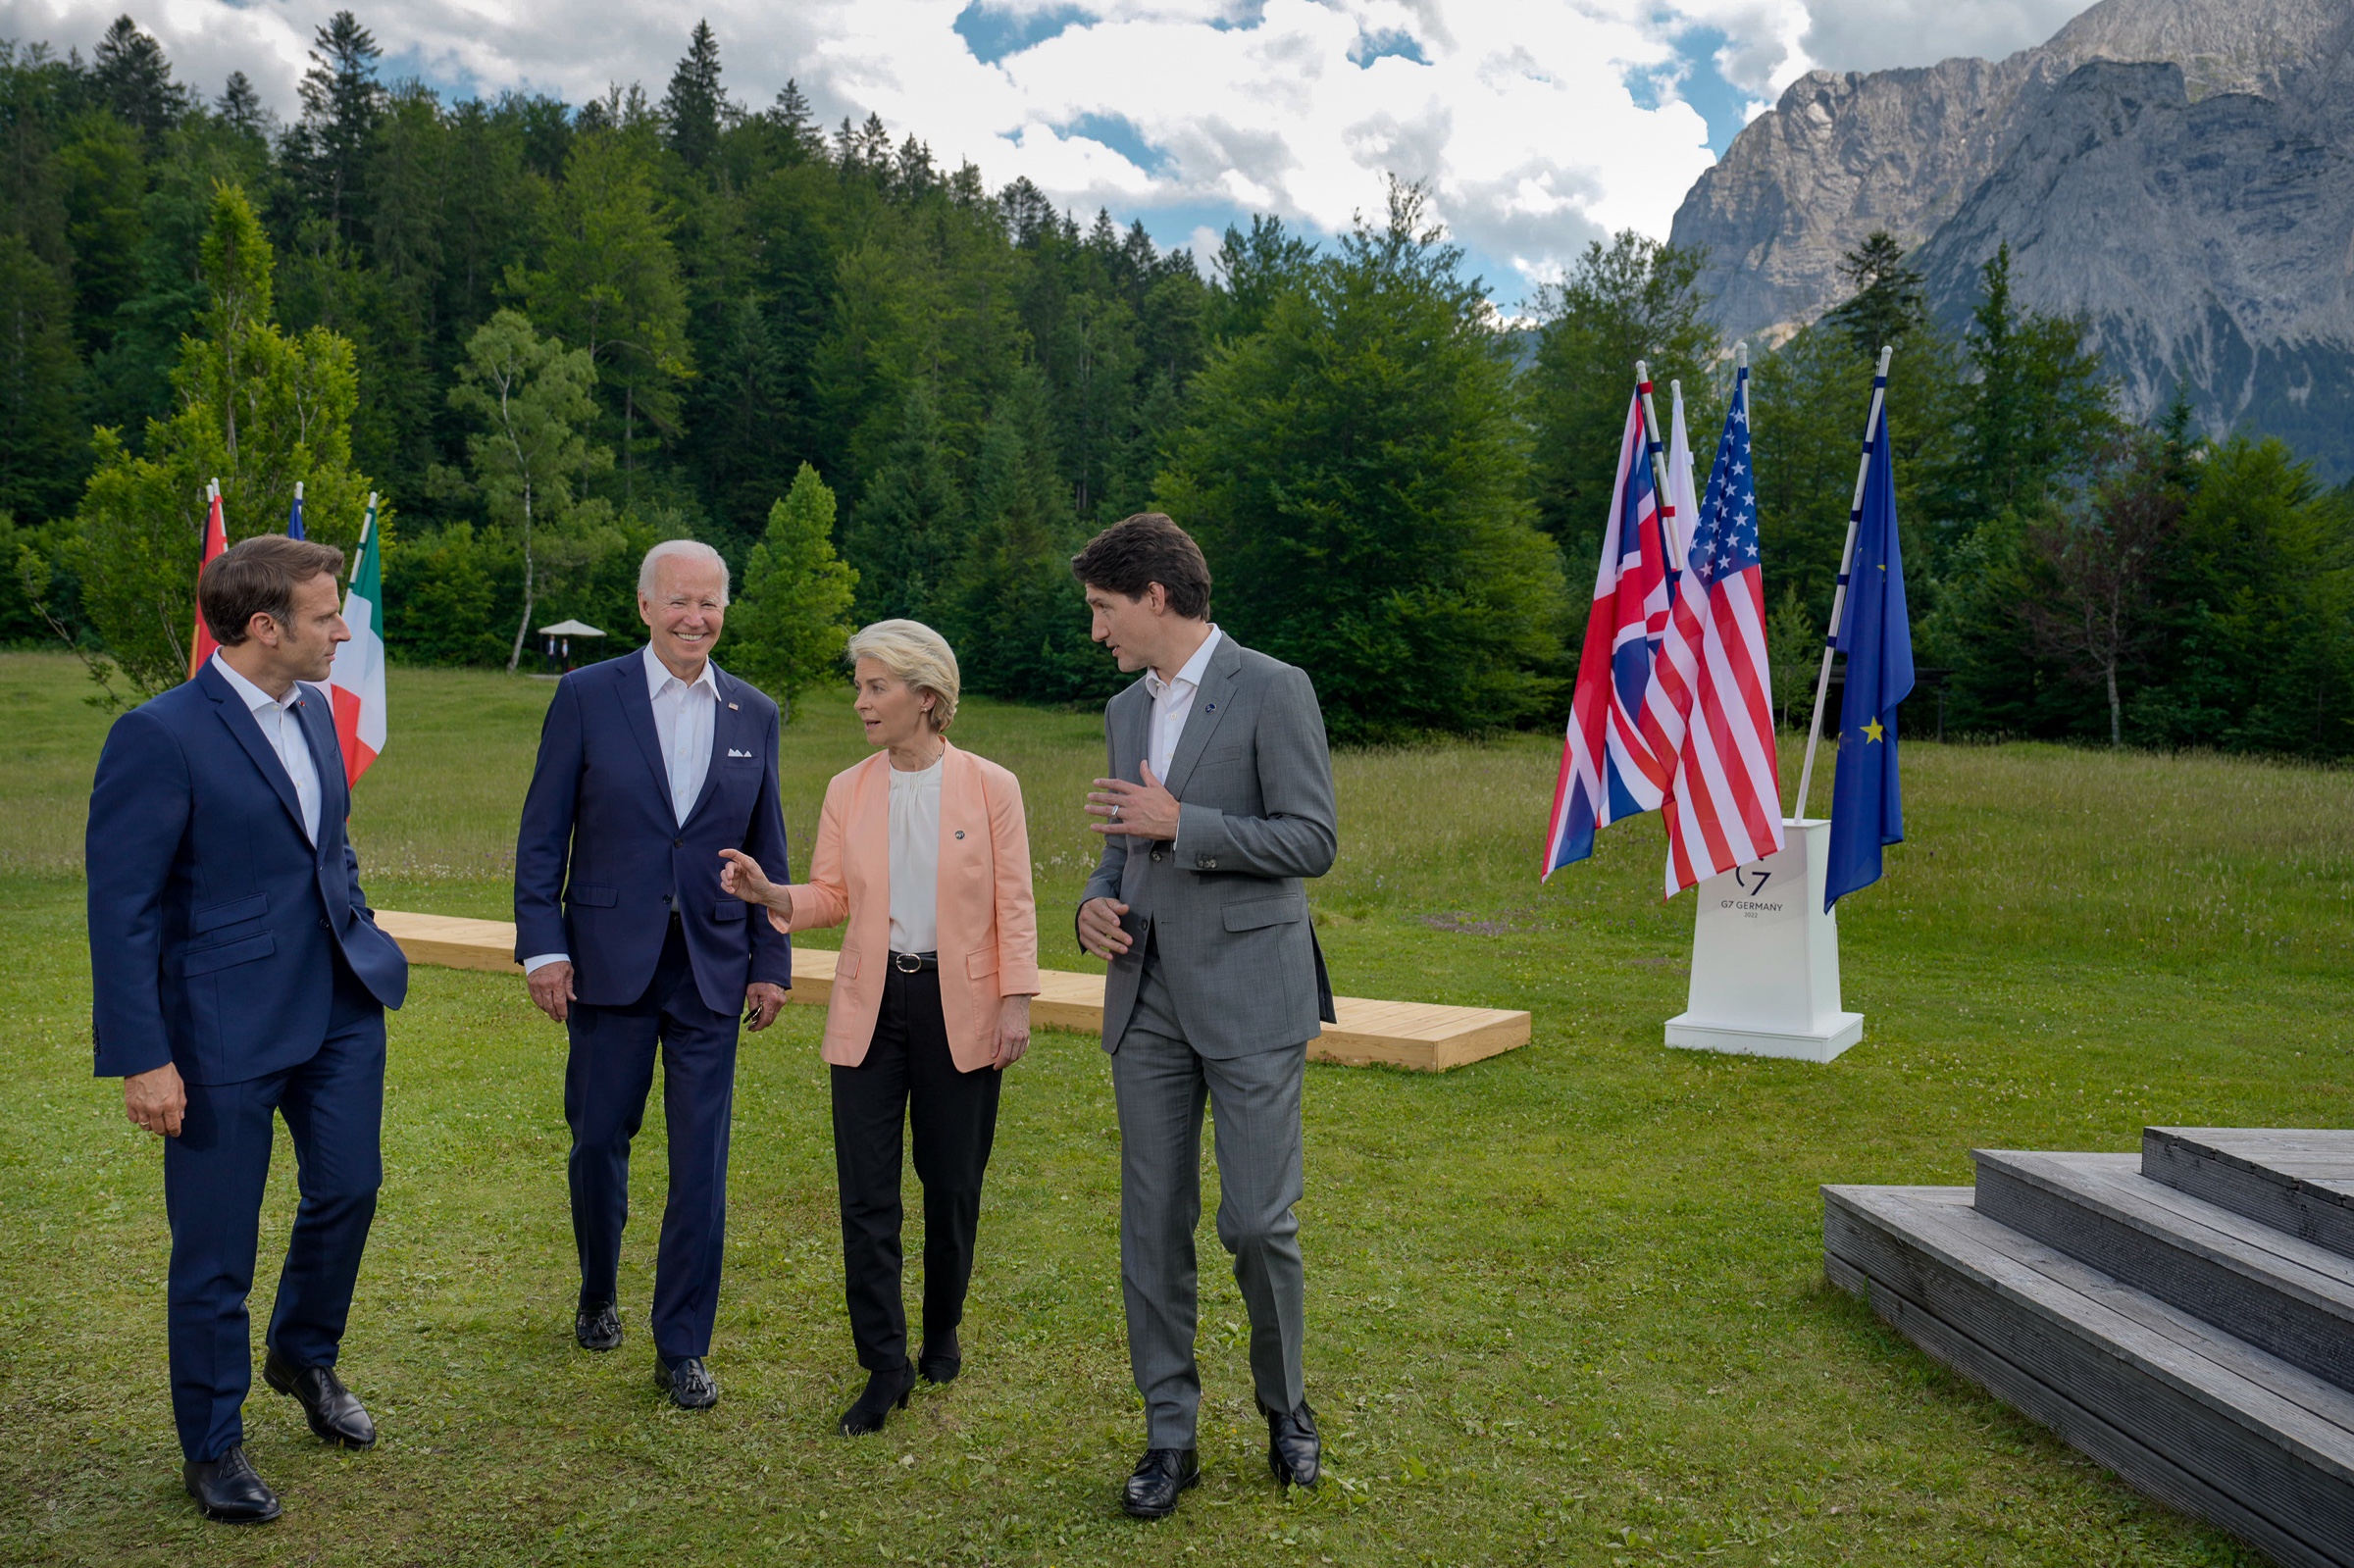 Biden meets with world leaders at the G7